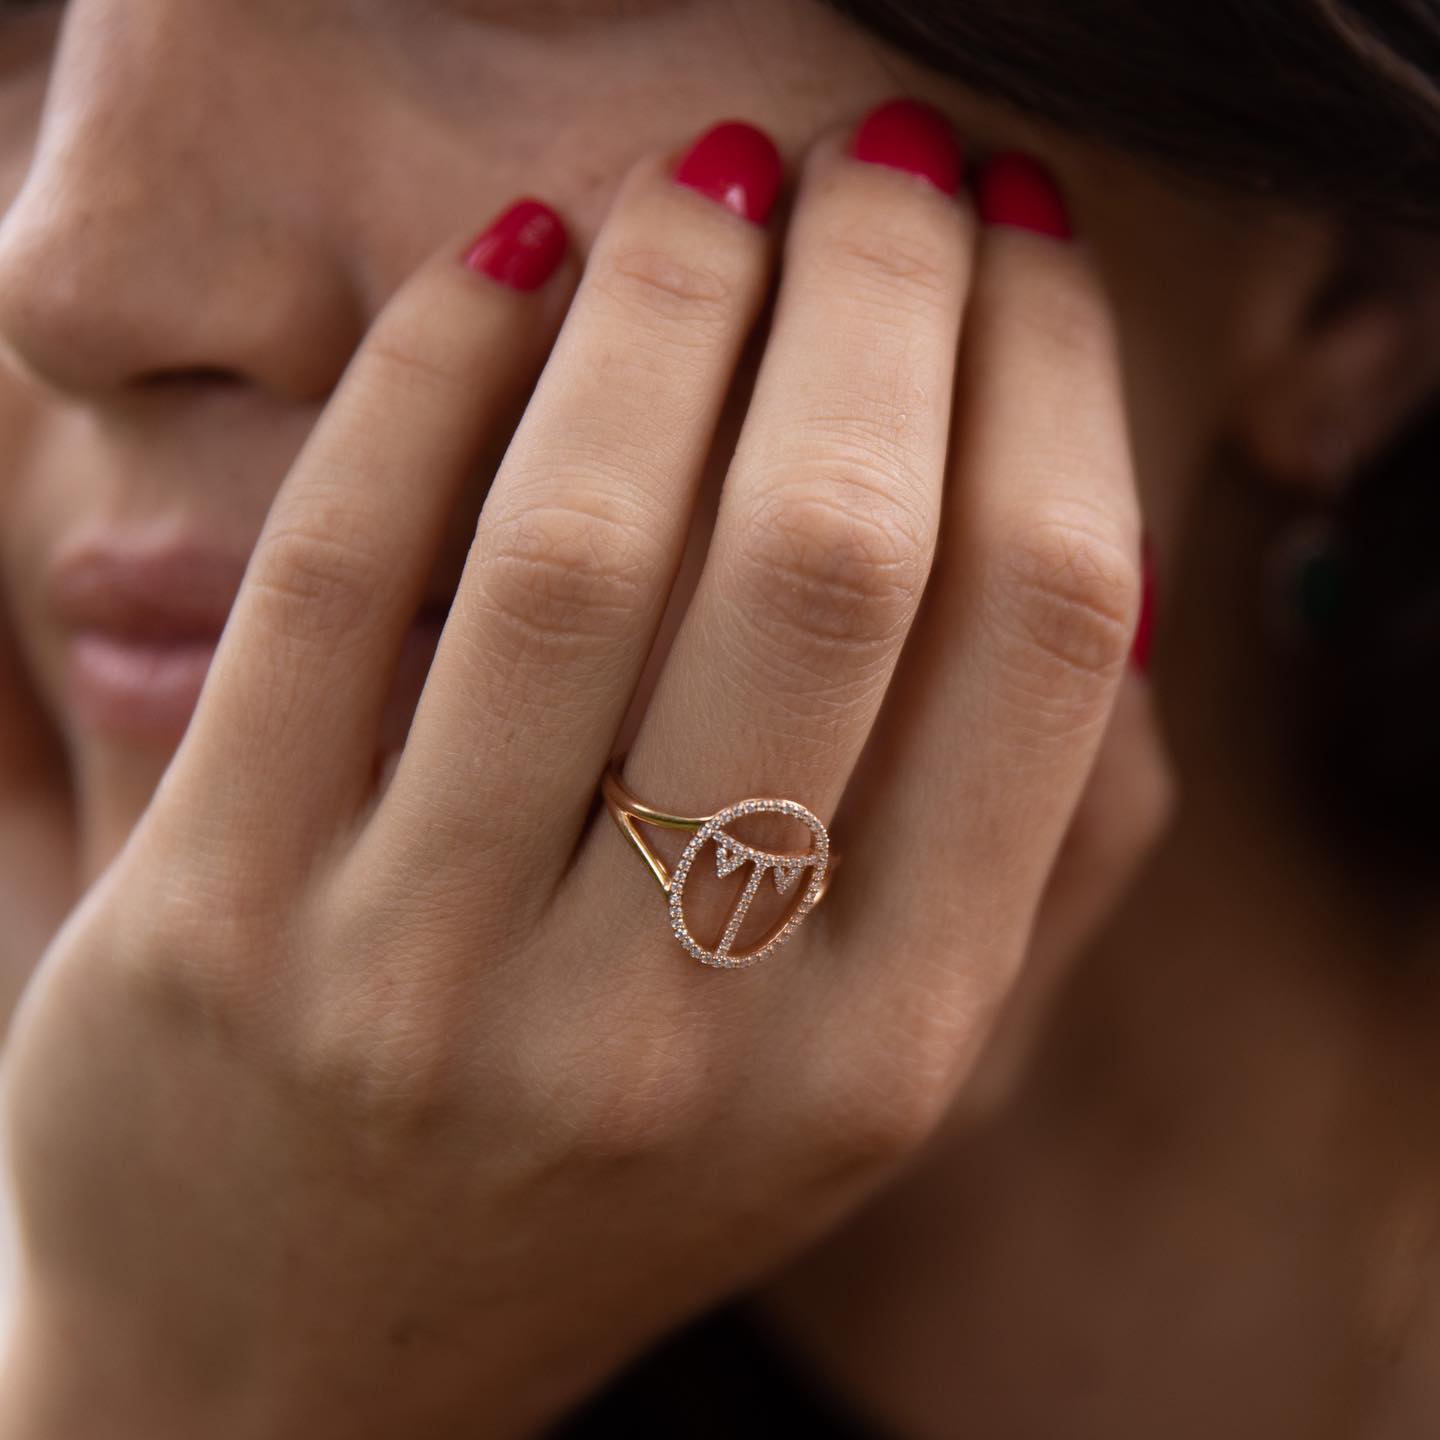 Put a ring on it #myritazia 
Discover our new Scarabée collection in 18 carats gold and white diamonds 
.
.
.
.
.
.
#jewelryfashion #jewelryblogger #jewerly #jewels #trendyjewelry #jewelrylovers #handmadejewelry #jewelrylover #jewel #jewelrydesigner